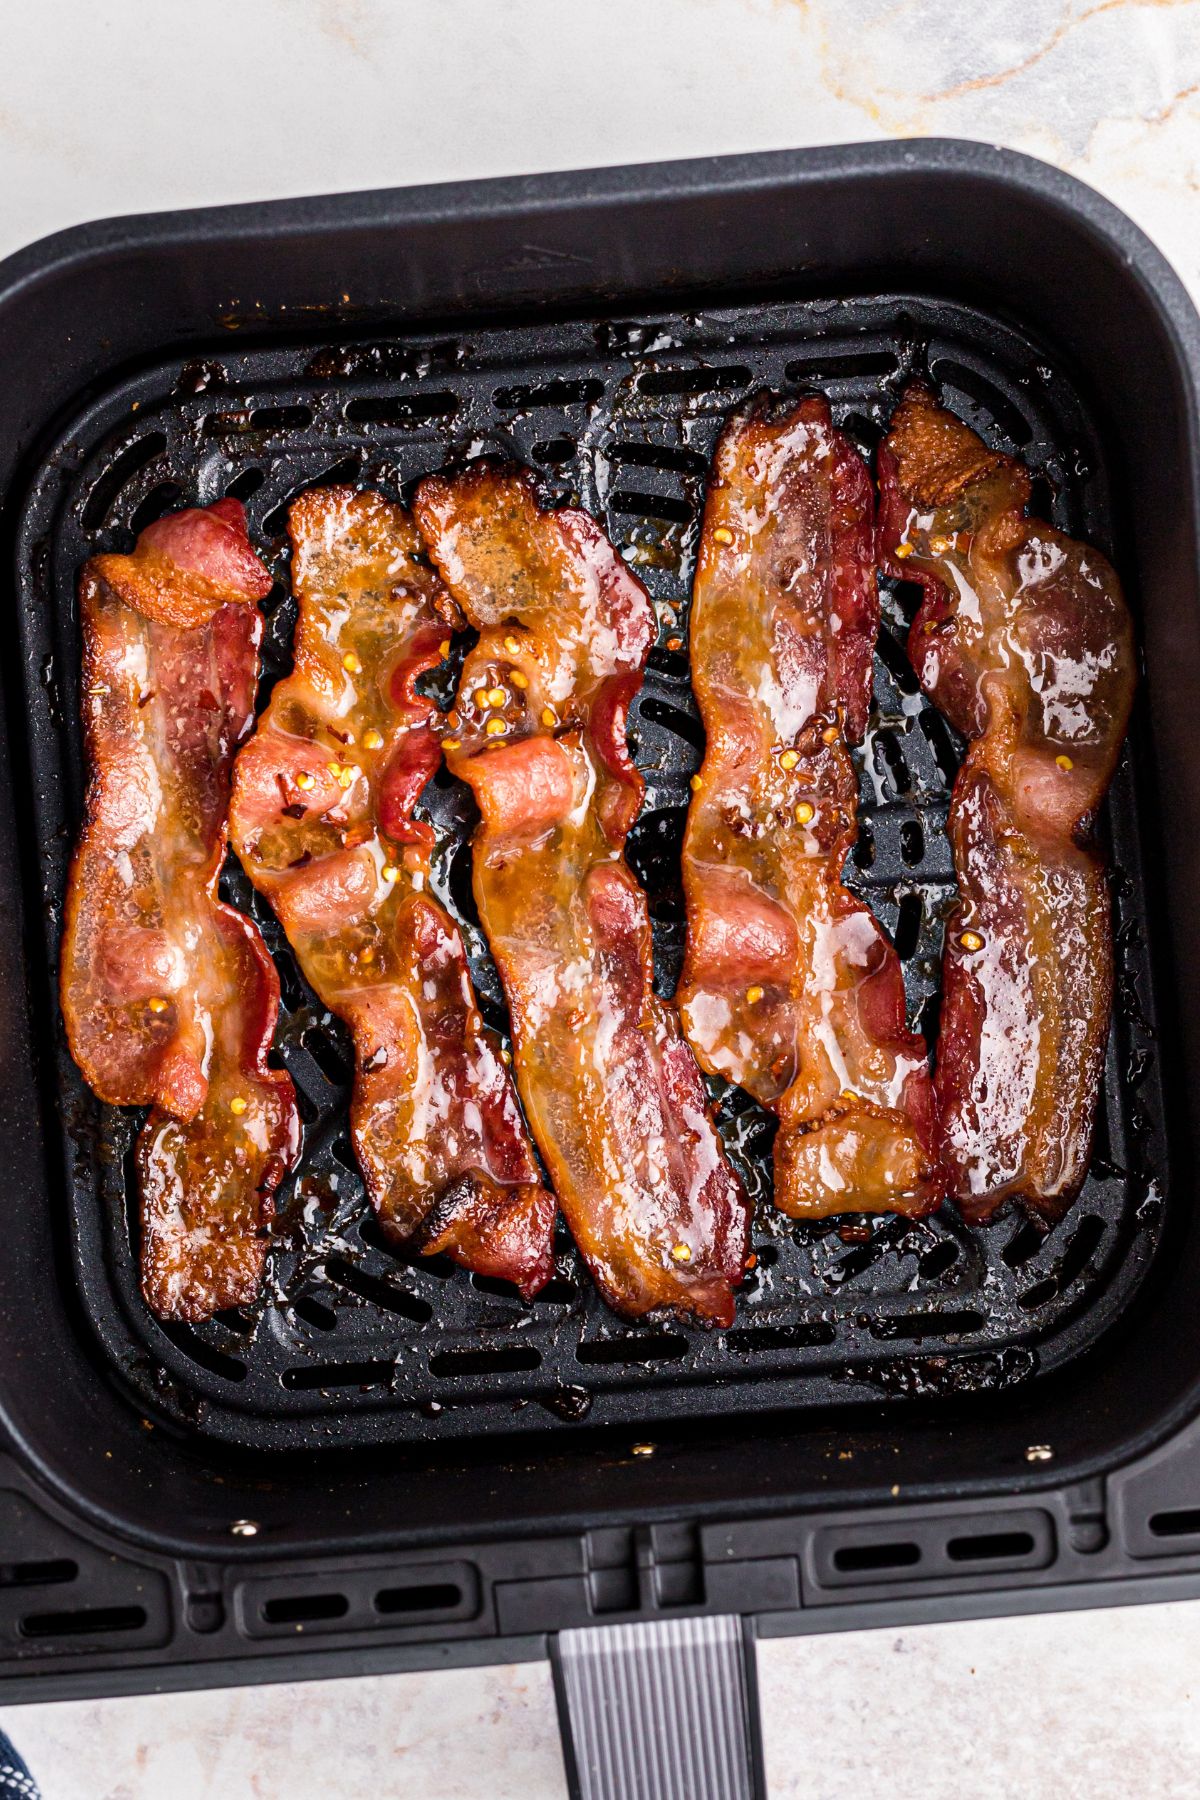 Crispy candied bacon in the air fryer basket after being cooked.